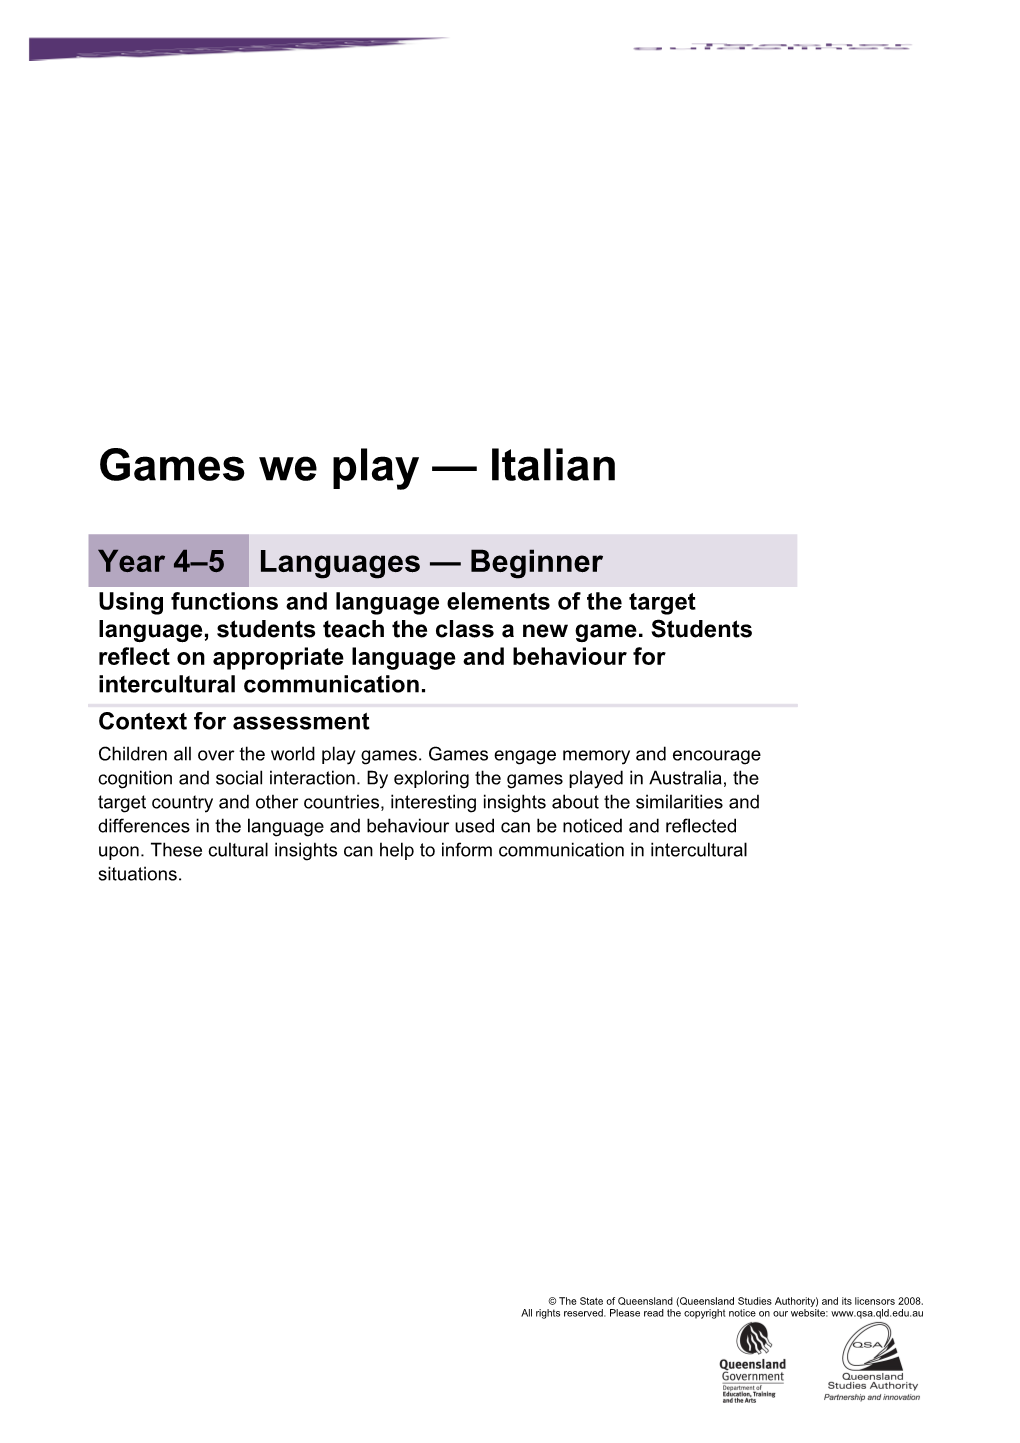 Year 4-5 Languages Assessment Teacher Guidelines Games We Play - Italian Queensland Essential